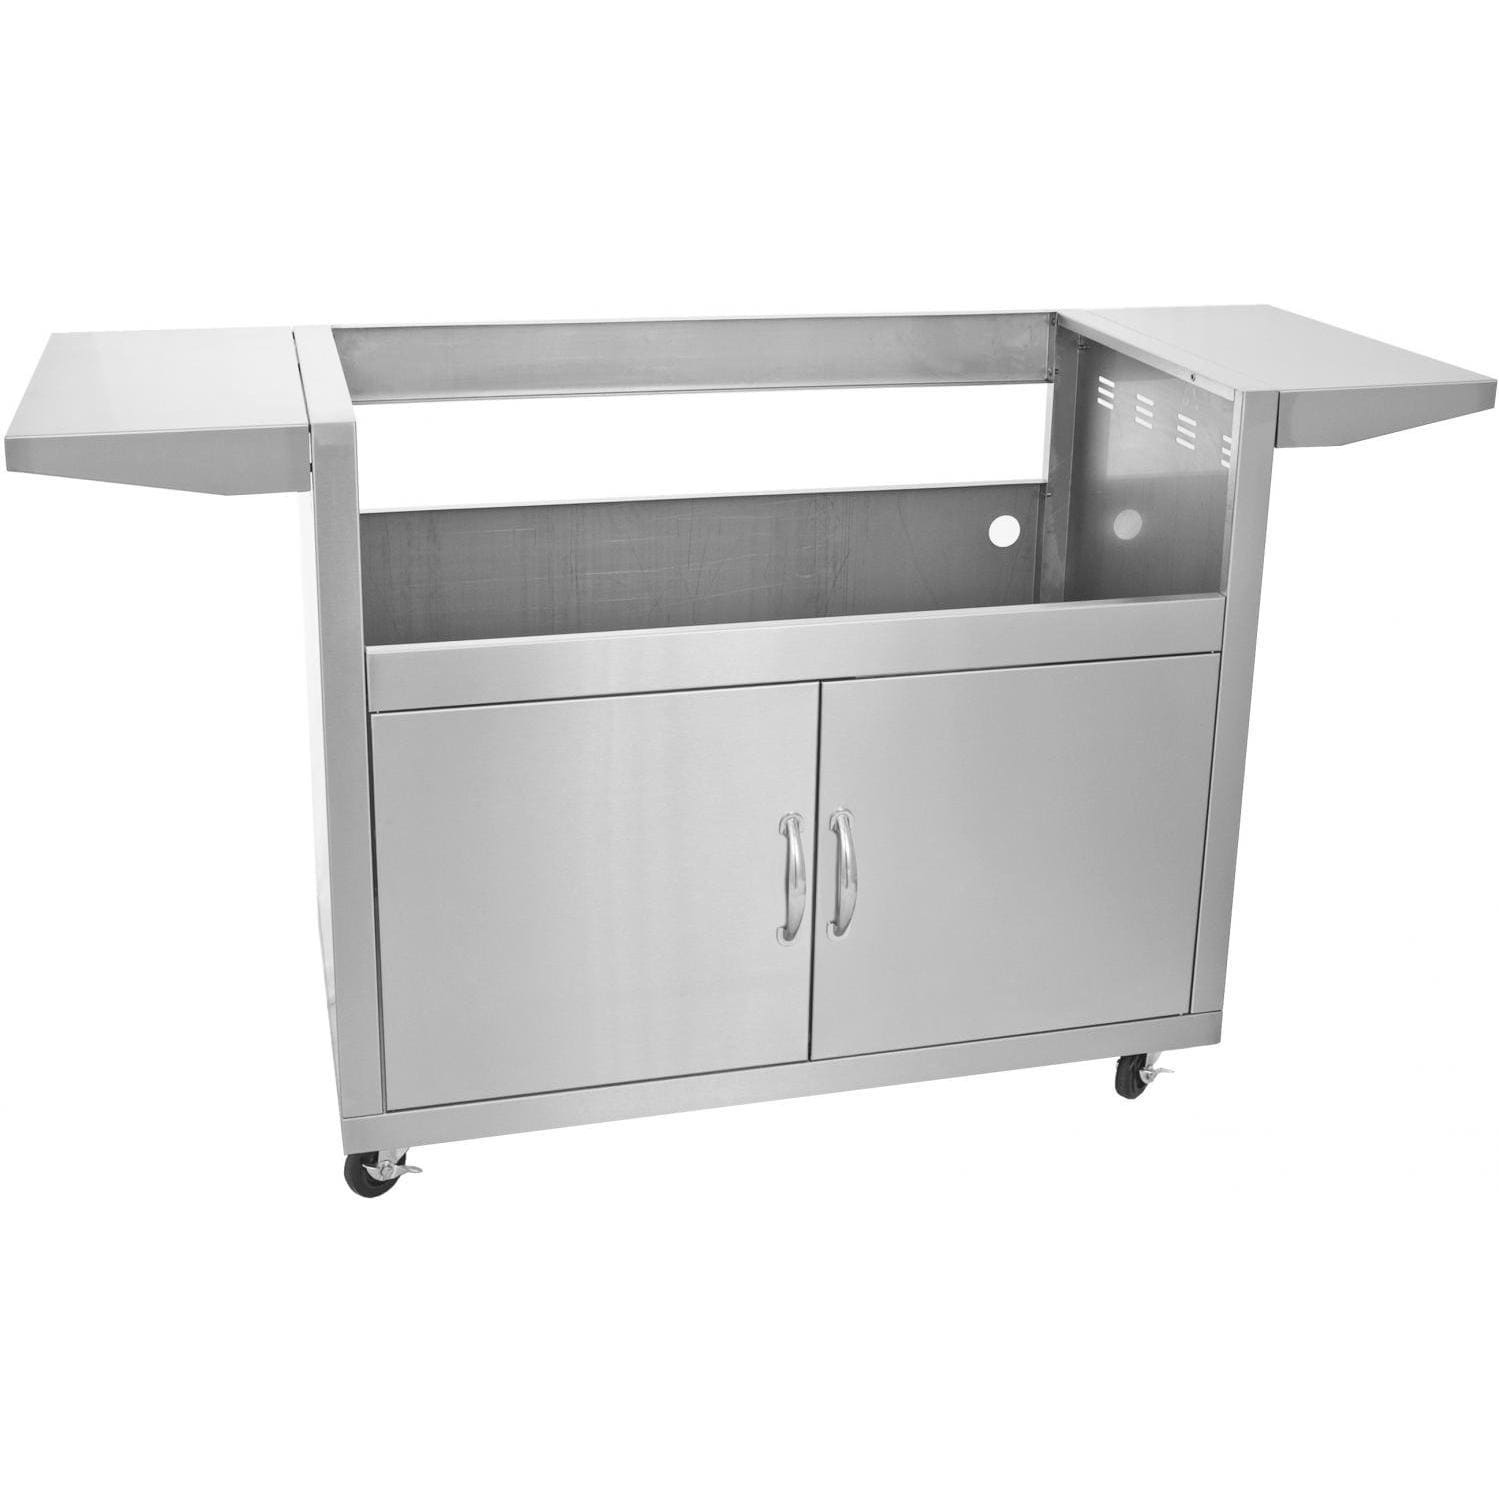 Blaze Grills Cart For 40-Inch Gas Grill - image 2 of 4